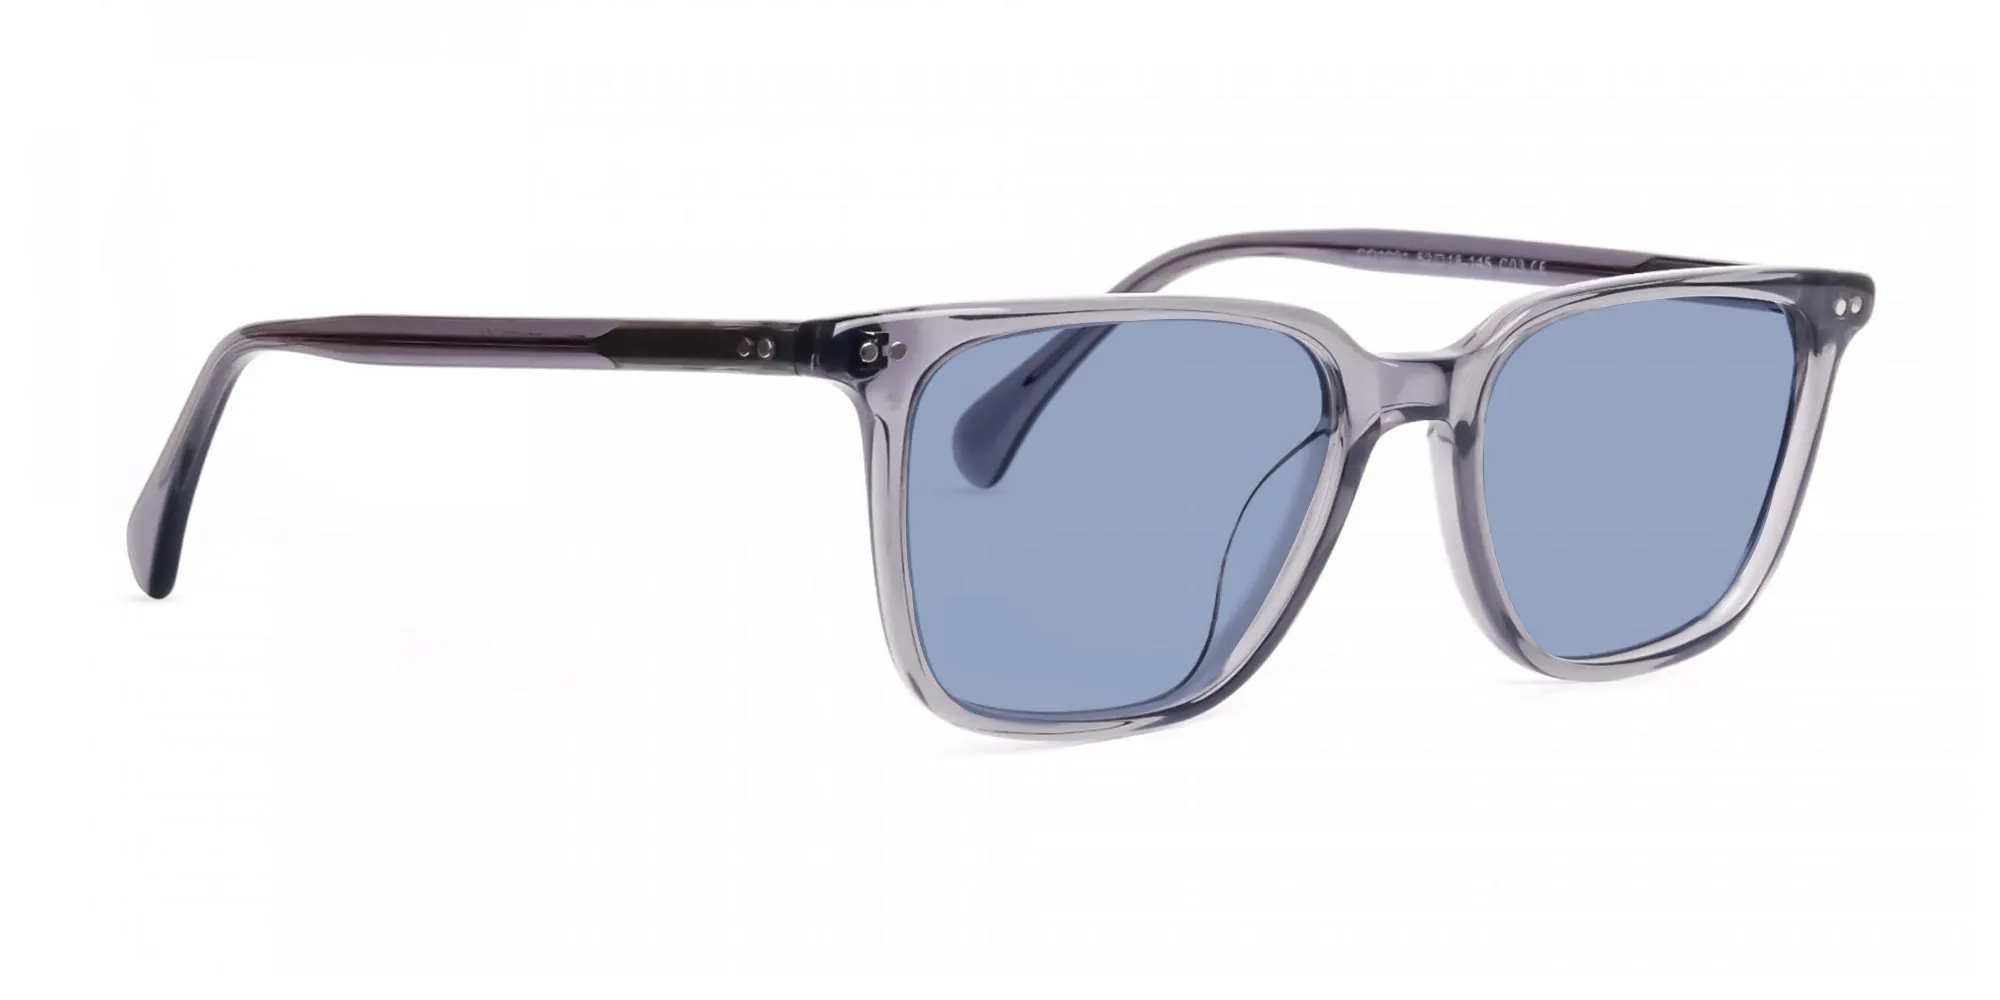 Grey Frame Glasses With Blue Tinted Lenses-2